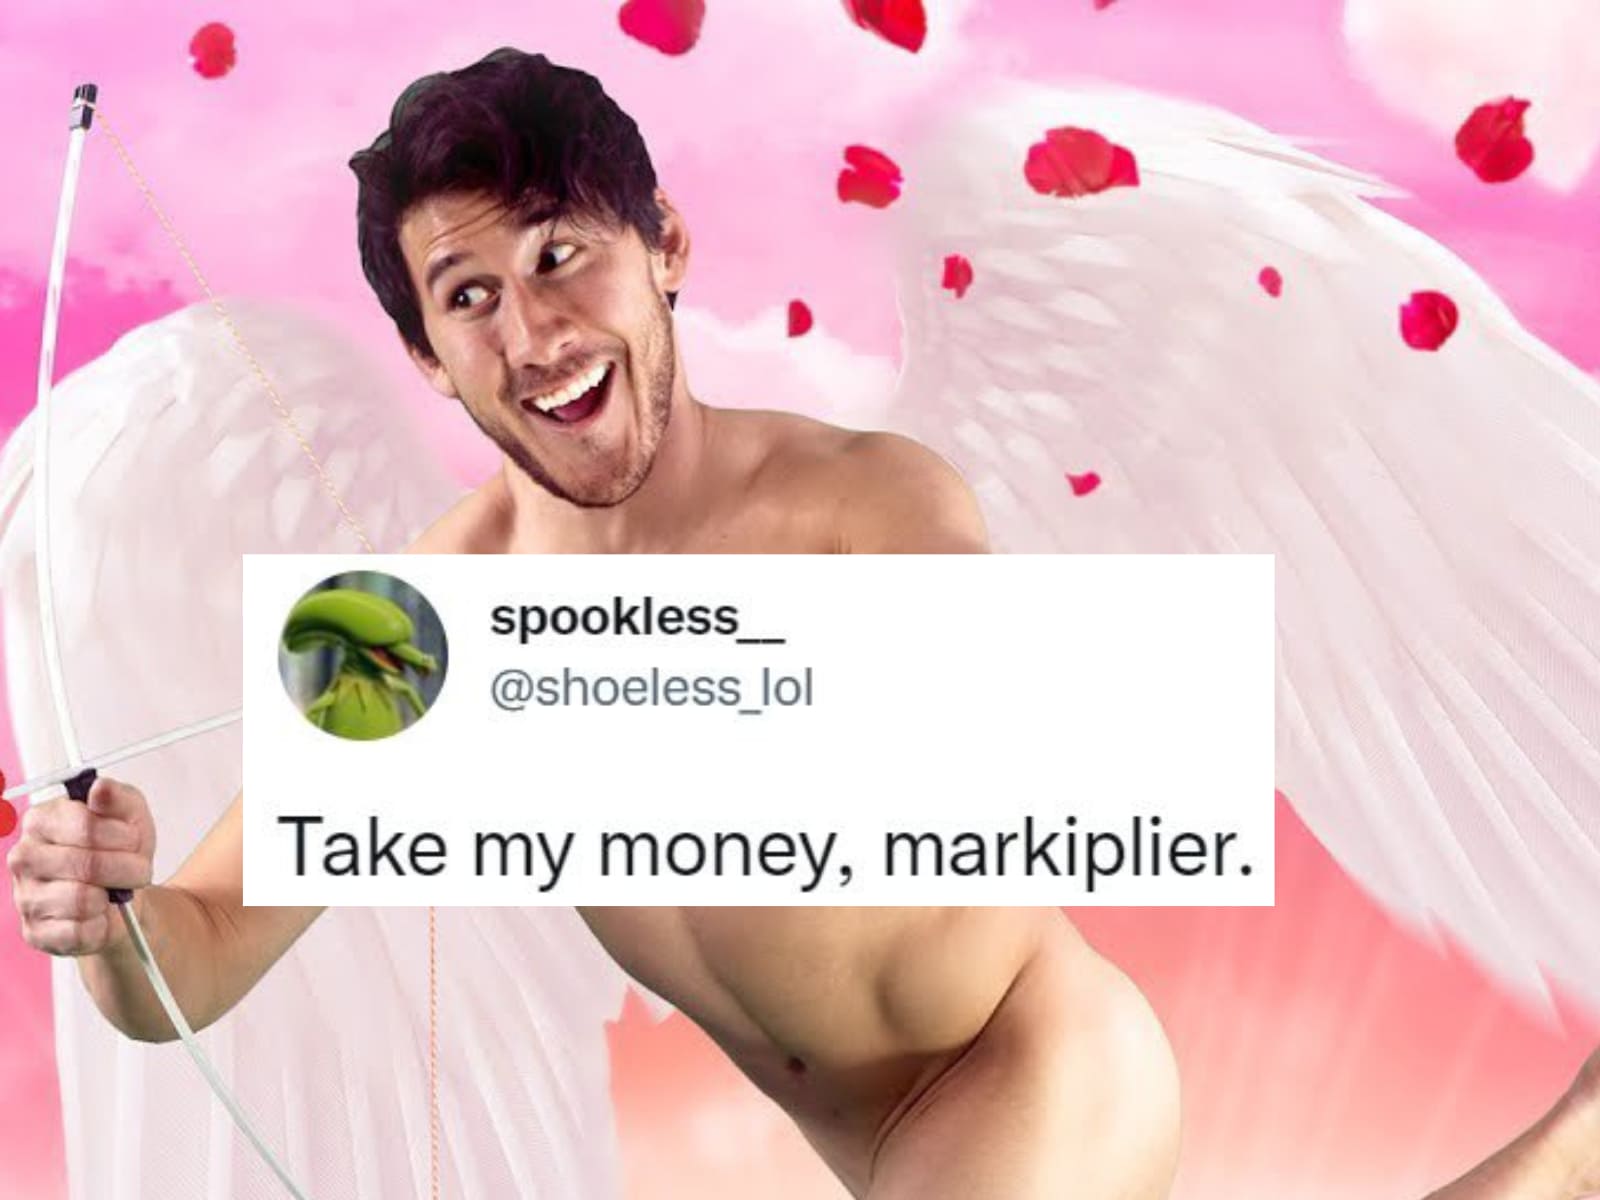 How Much Did Markiplier Make From His Onlyfans